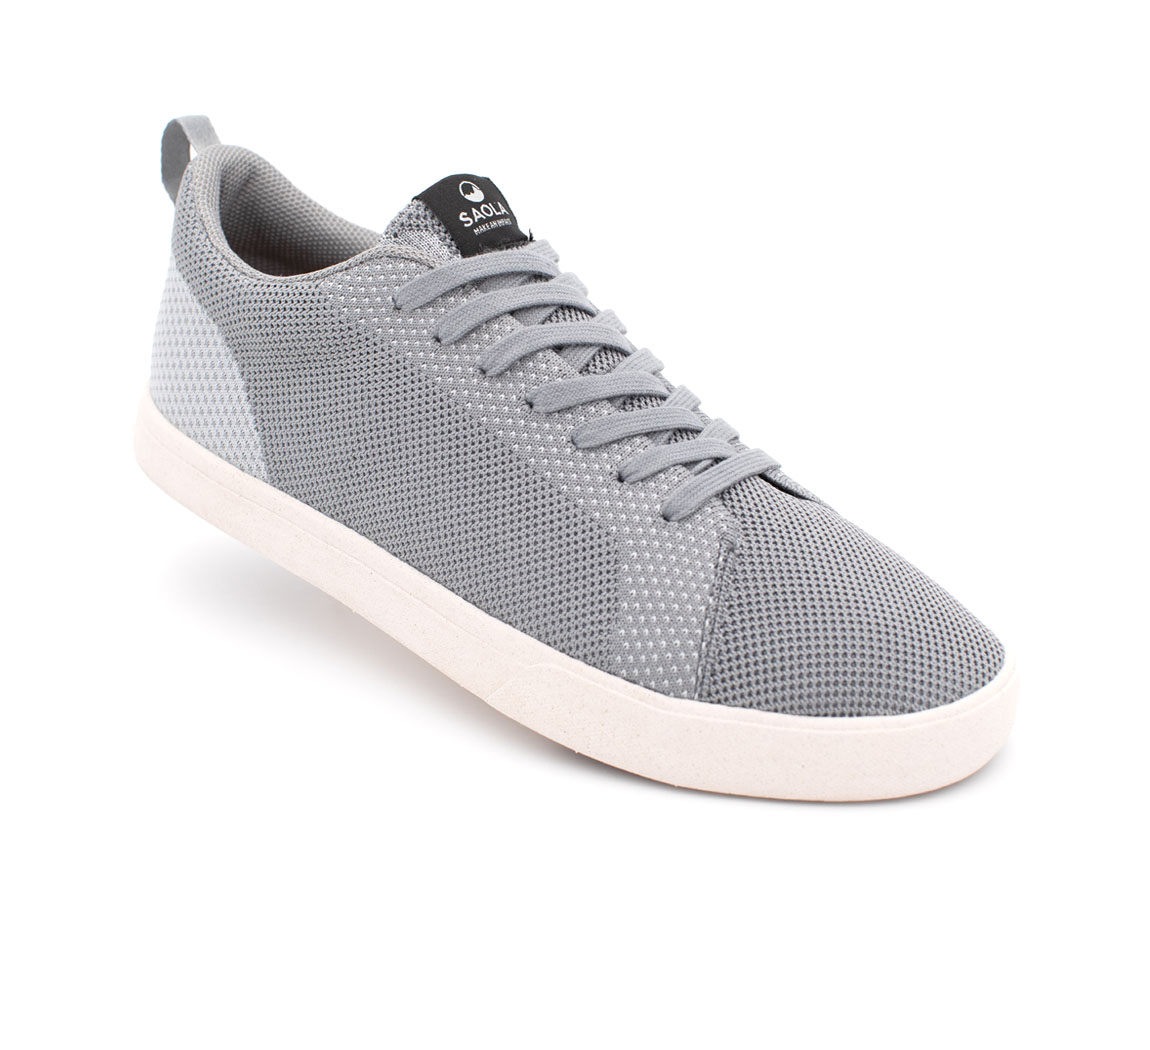 Chaussure homme Cannon Knit